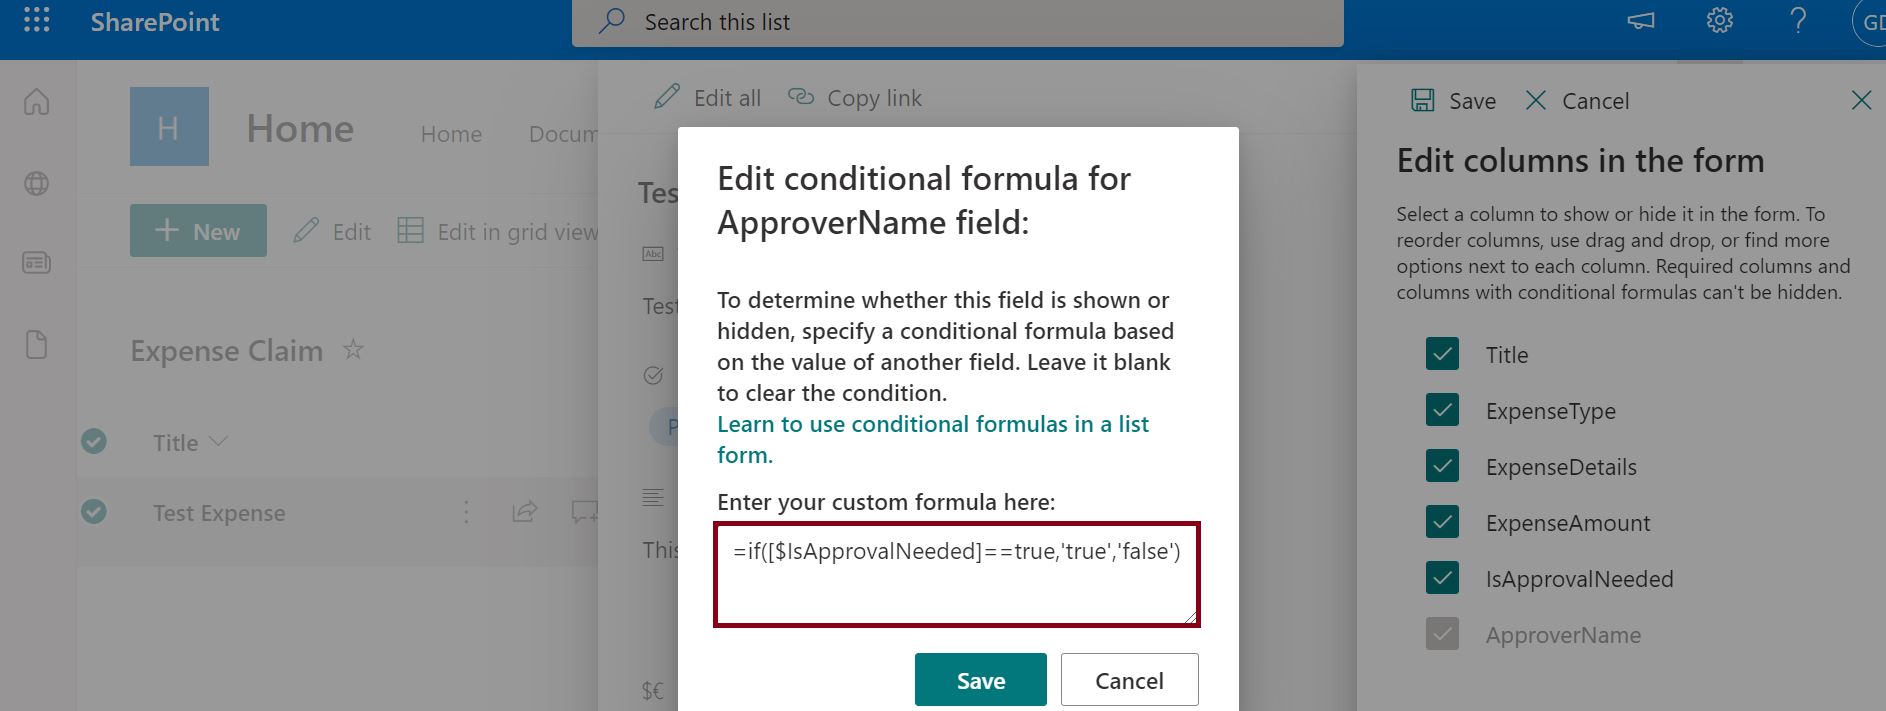 Conditionally show or hide columns in a SharePoint list, Edit conditional formula for SharePoint field